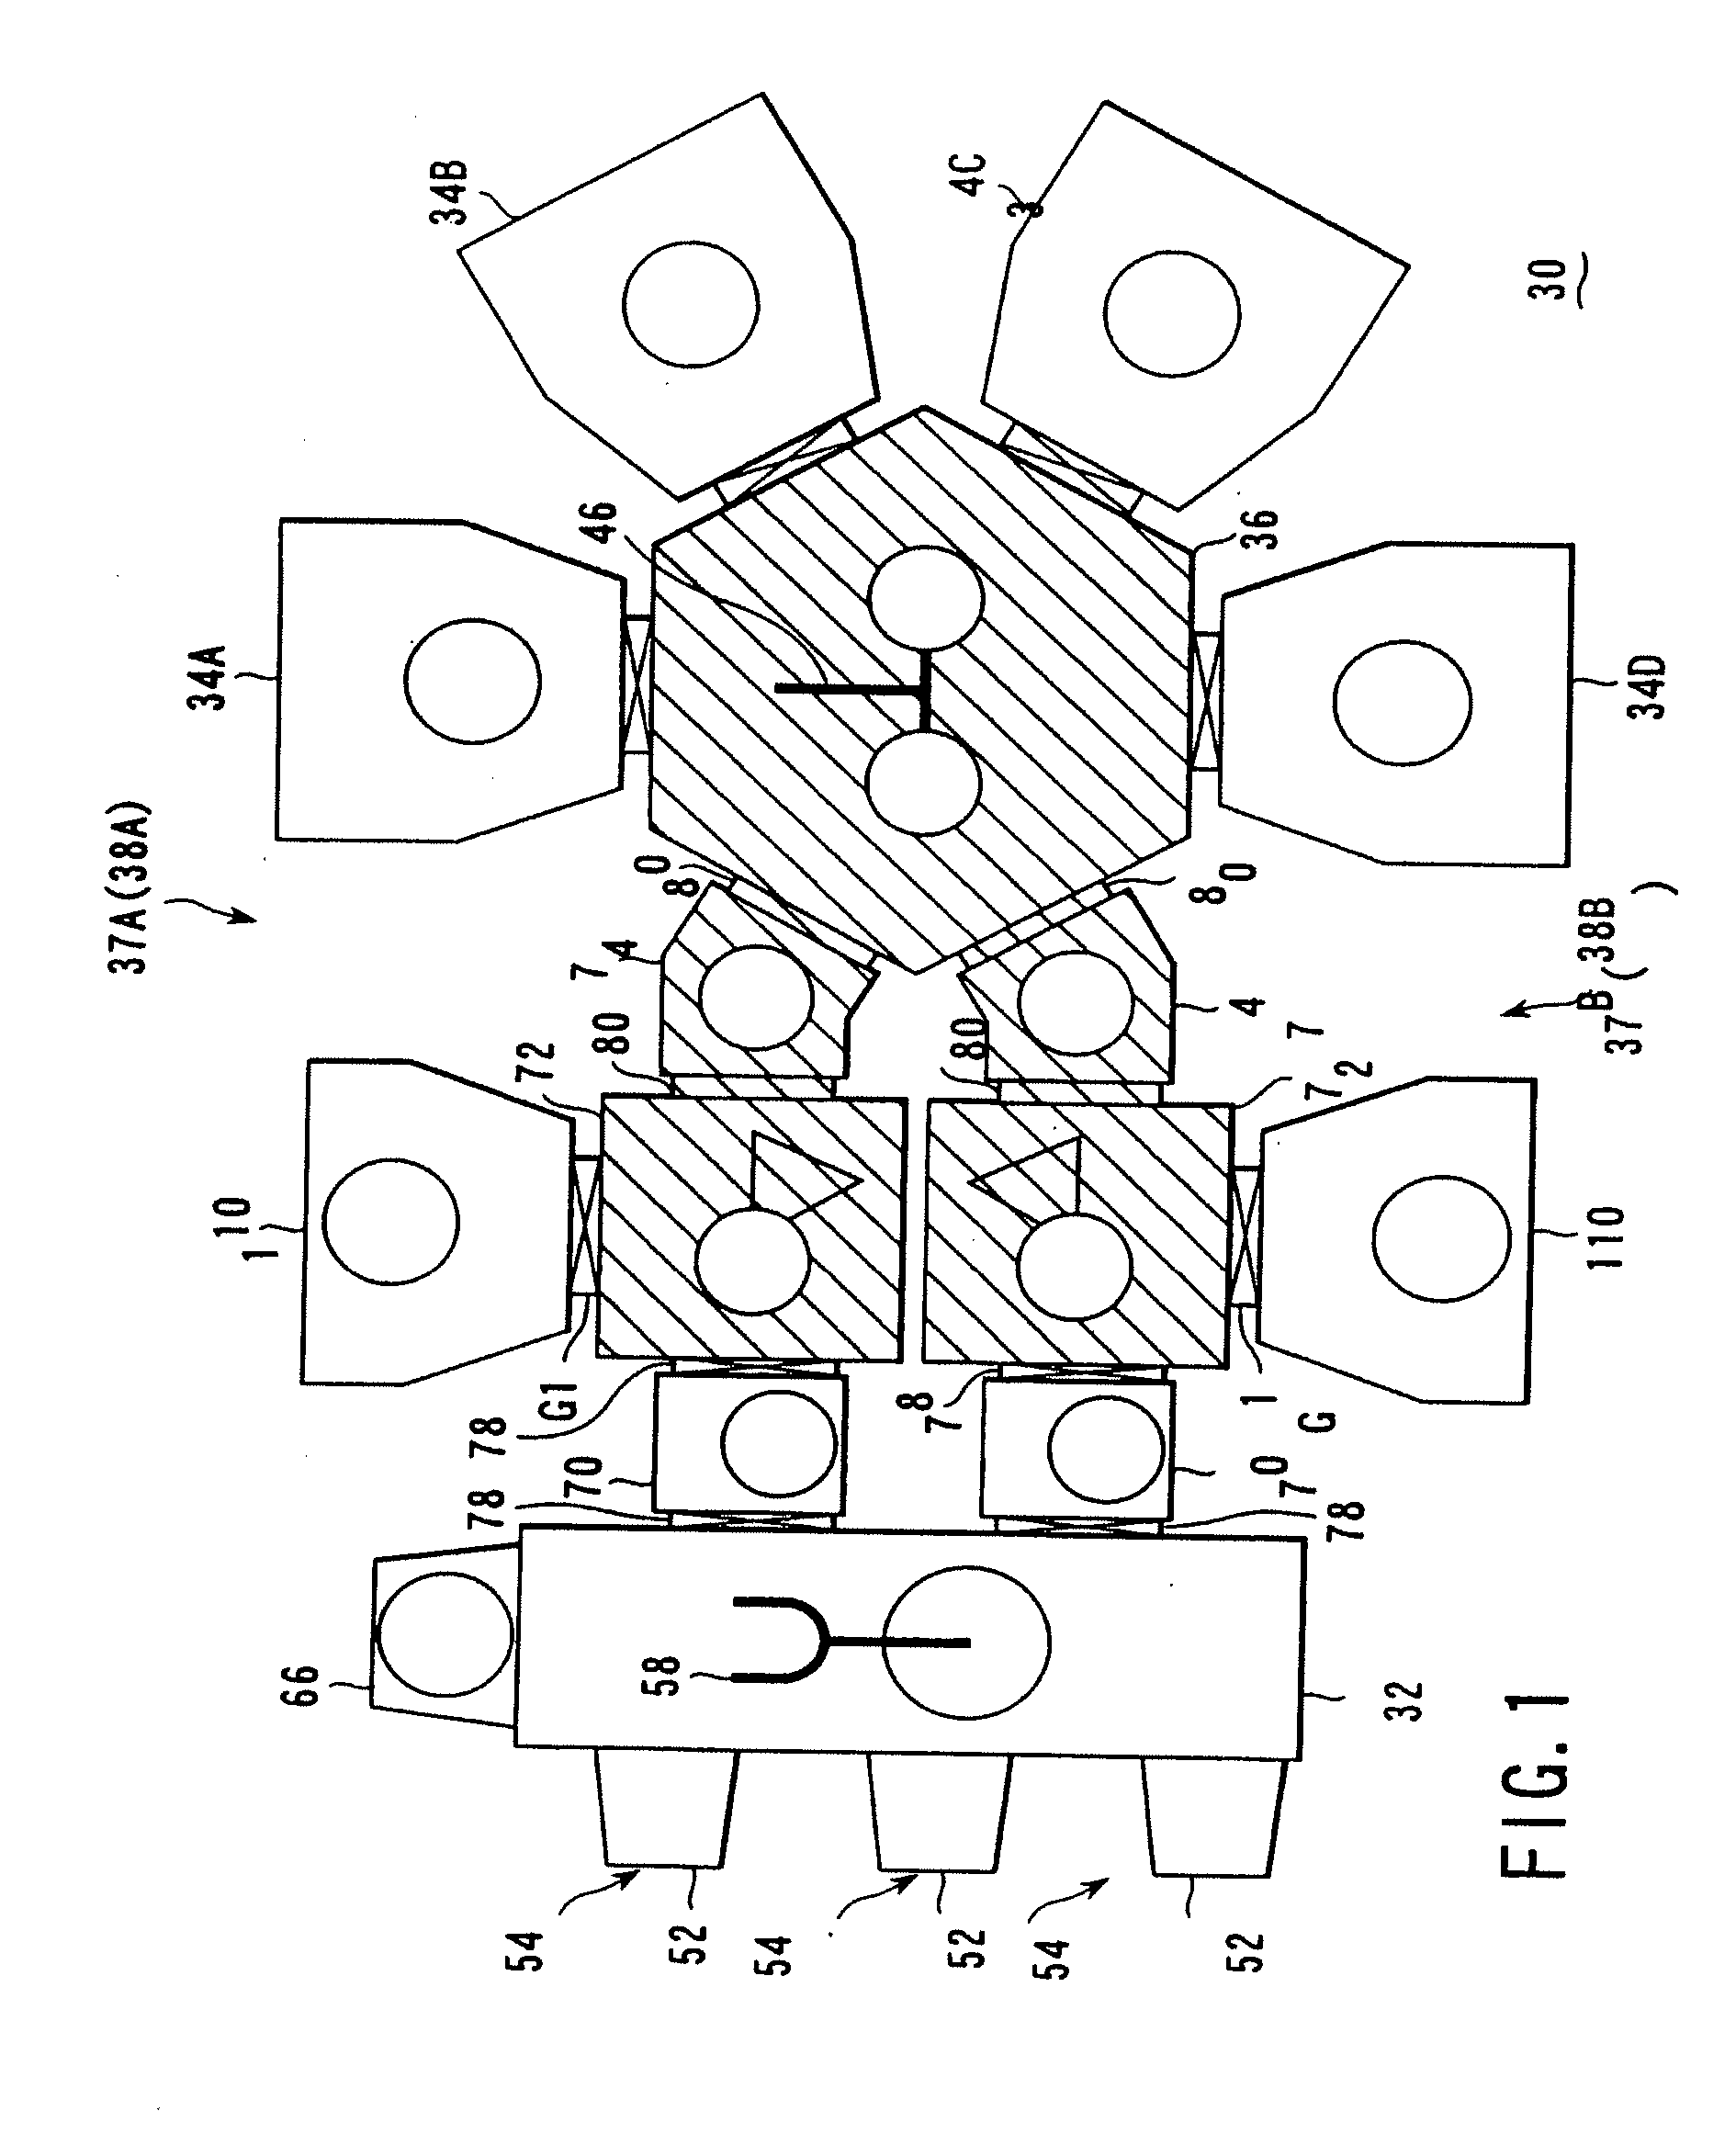 Semiconductor processing system